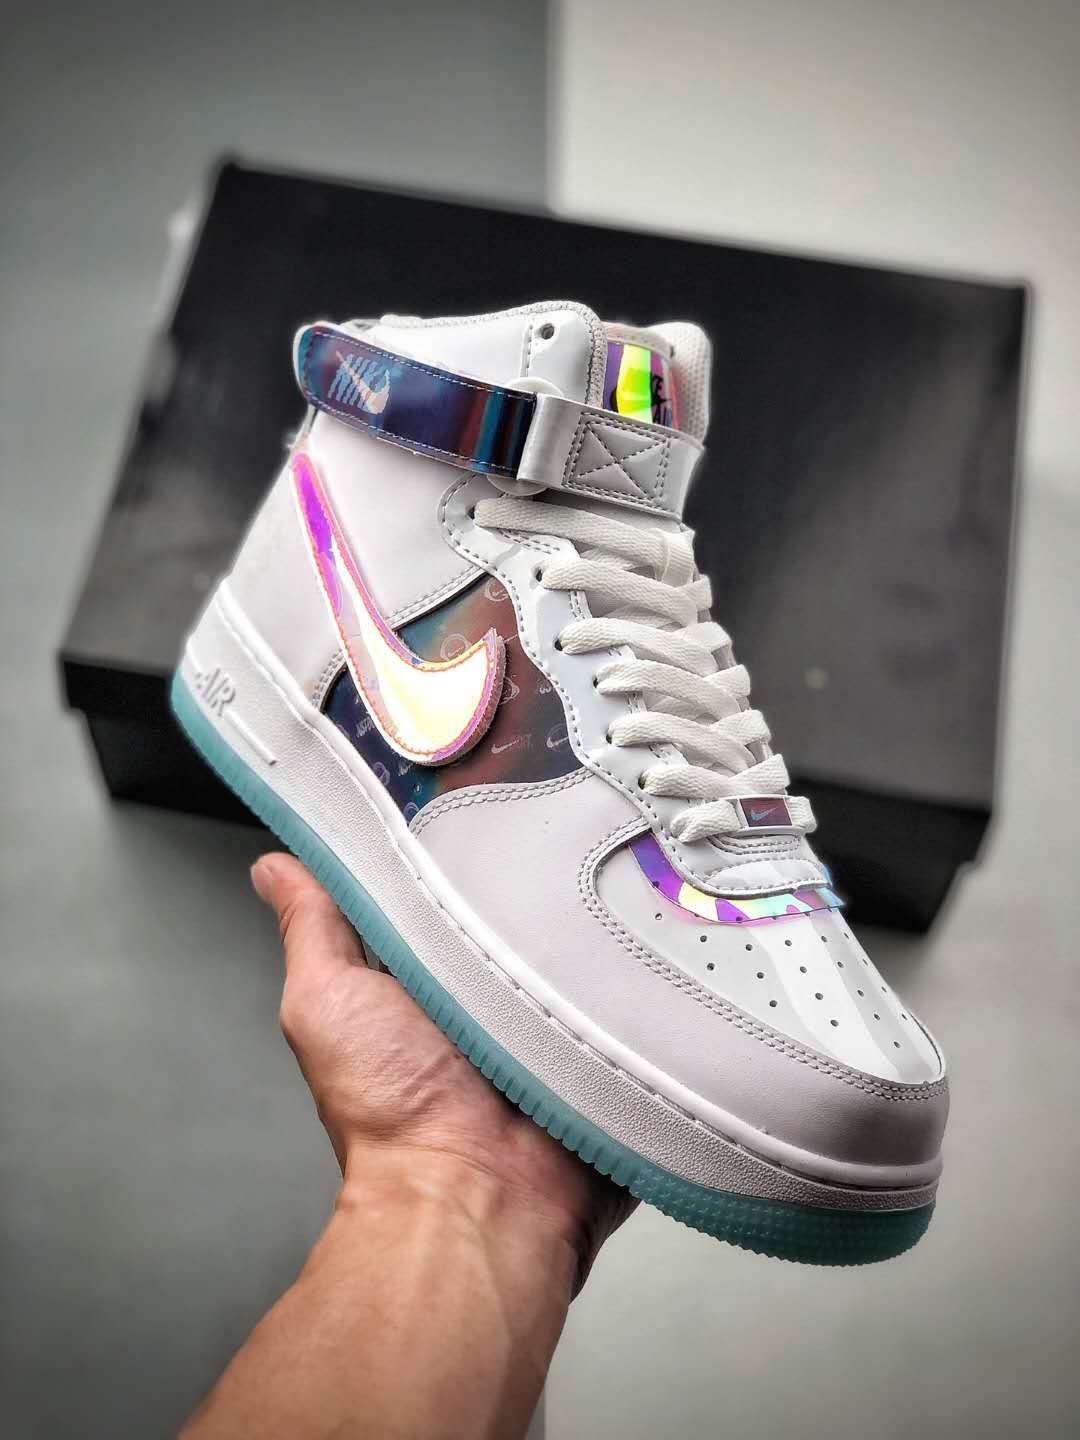 Nike Air Force 1 High LX 'Have A Good Game' DC2111-191 | Limited Edition Sneakers